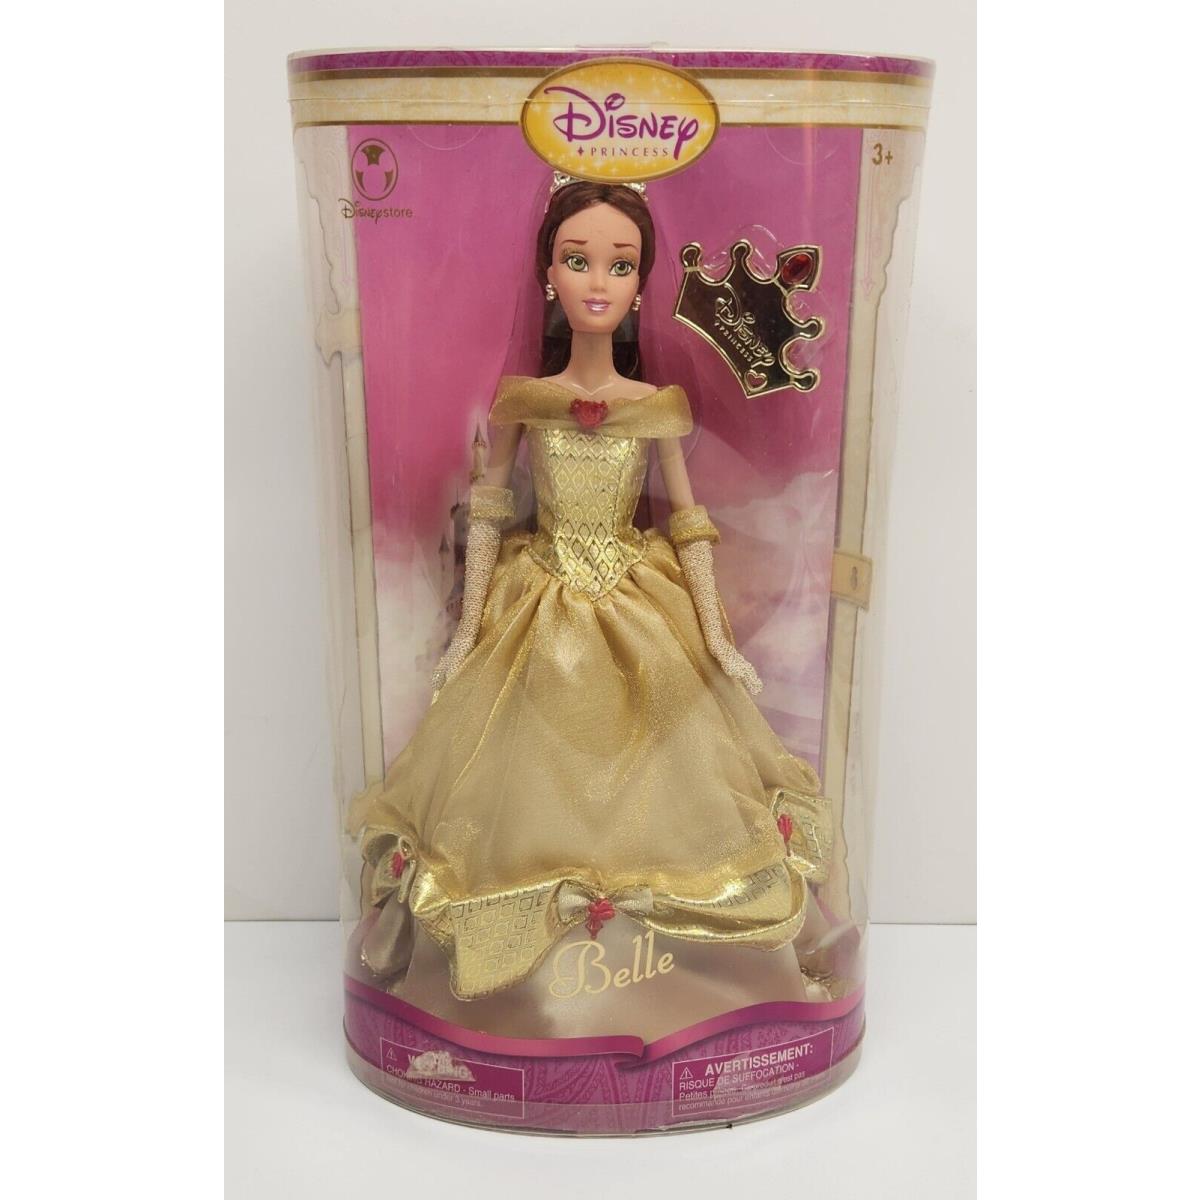 Belle Exclusive Disney Princess Collection Doll Disney Store